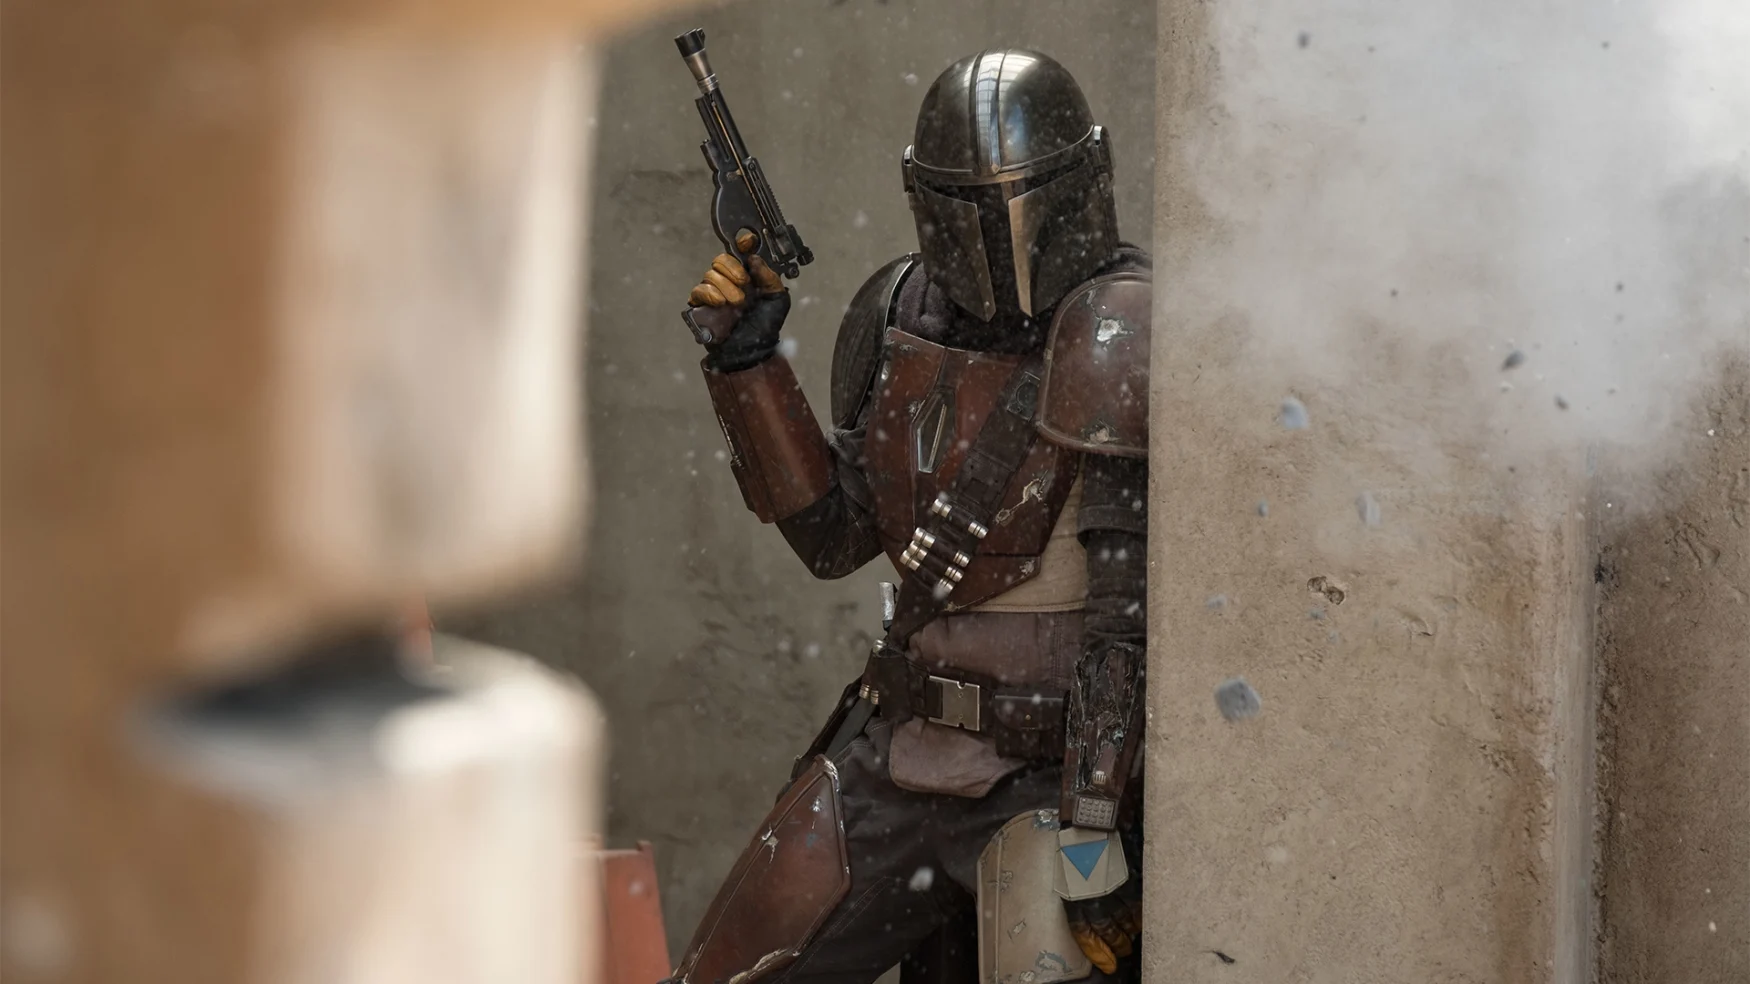 Media image from “The Mandalorian,” featuring the title character holding a blaster while taking cover behind a corner.